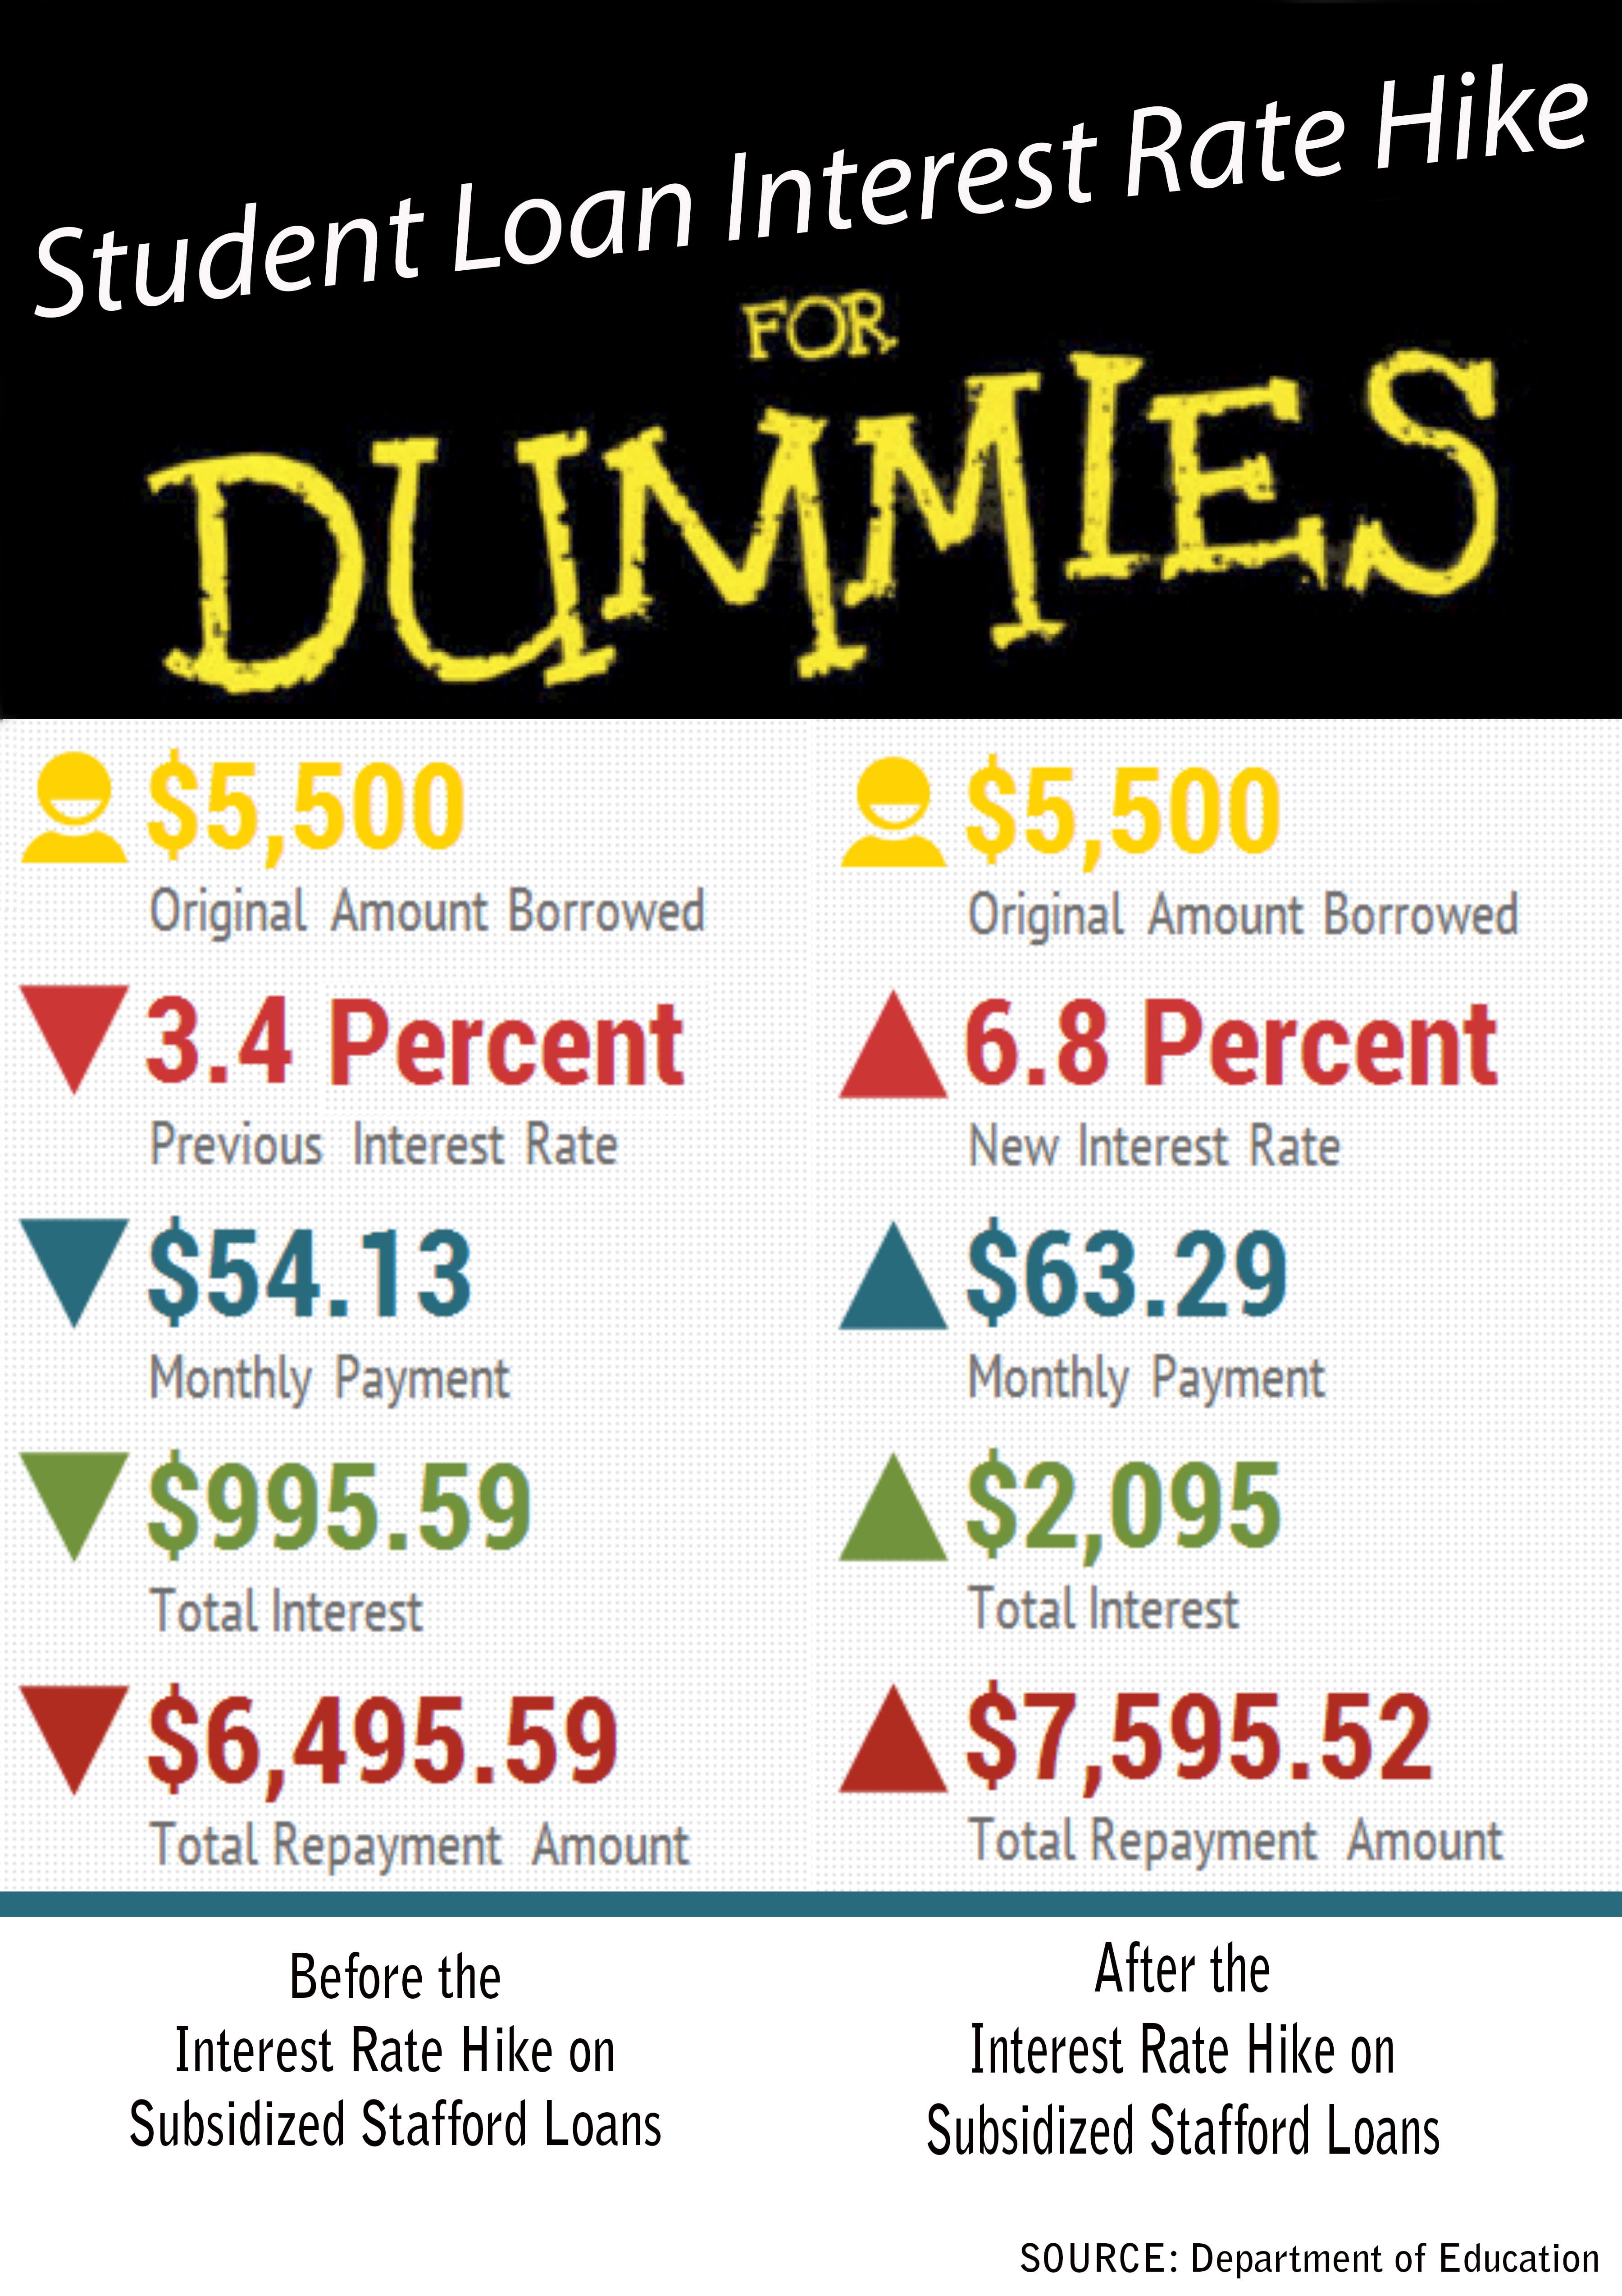 Student-Loan-Interest-Rate-for-Dummies_WP12.jpg